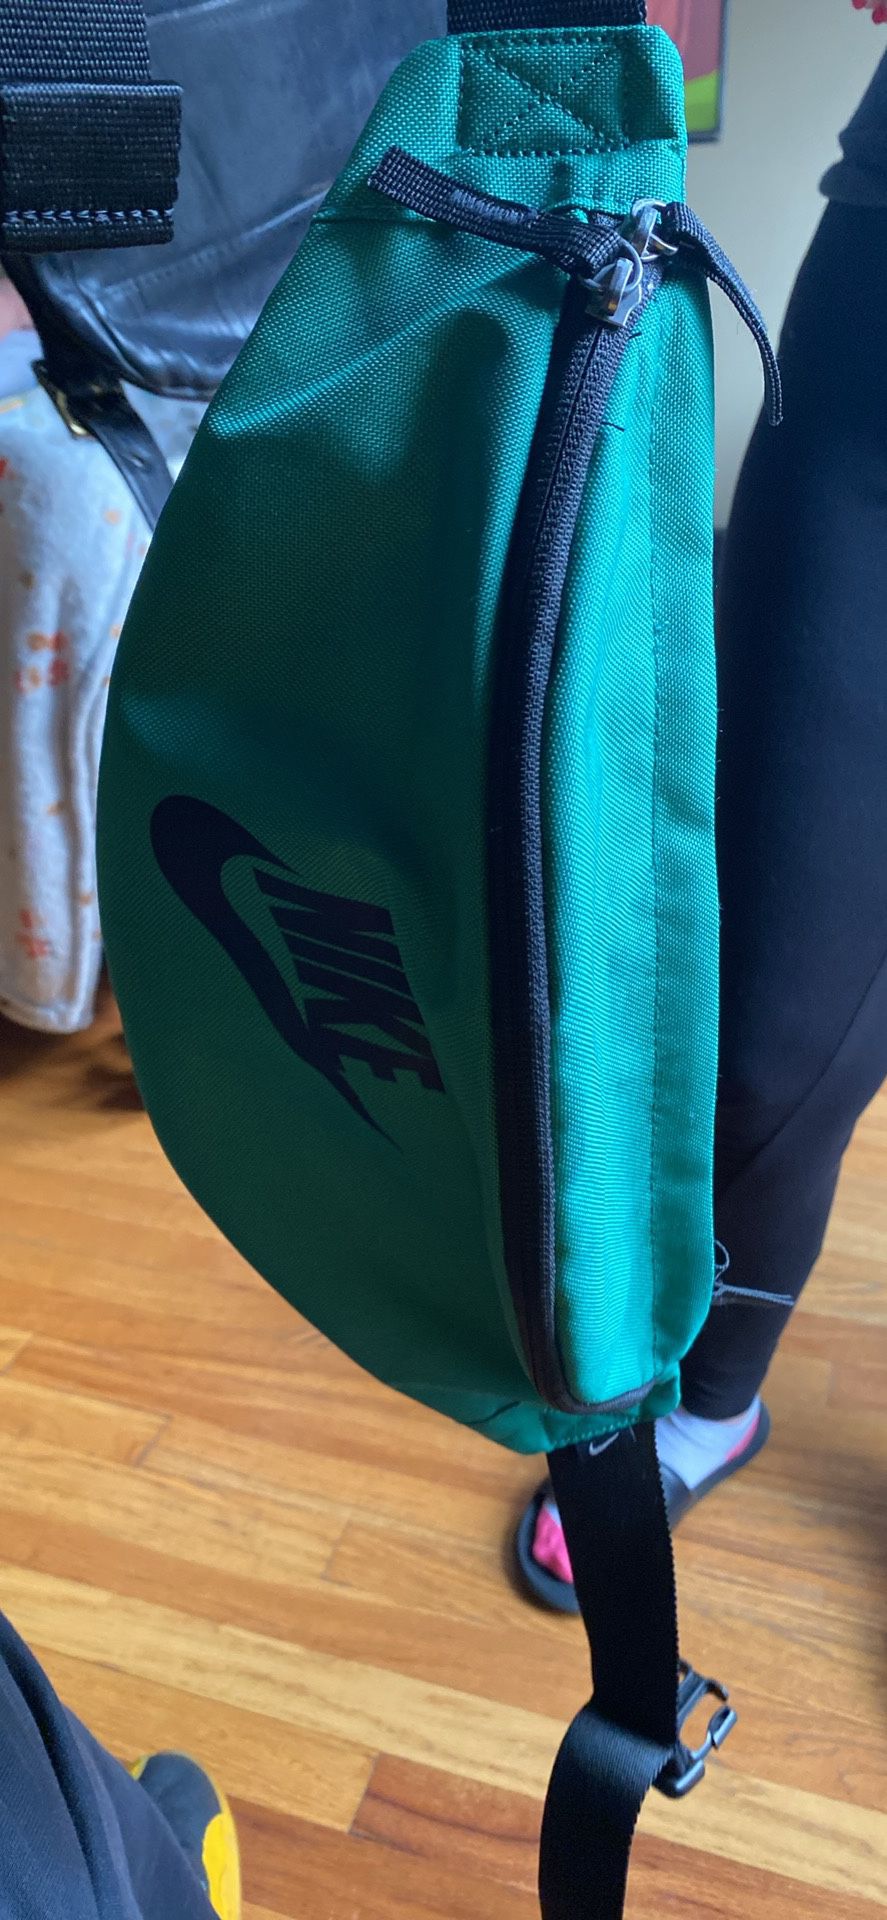 New large Nike fanny pack